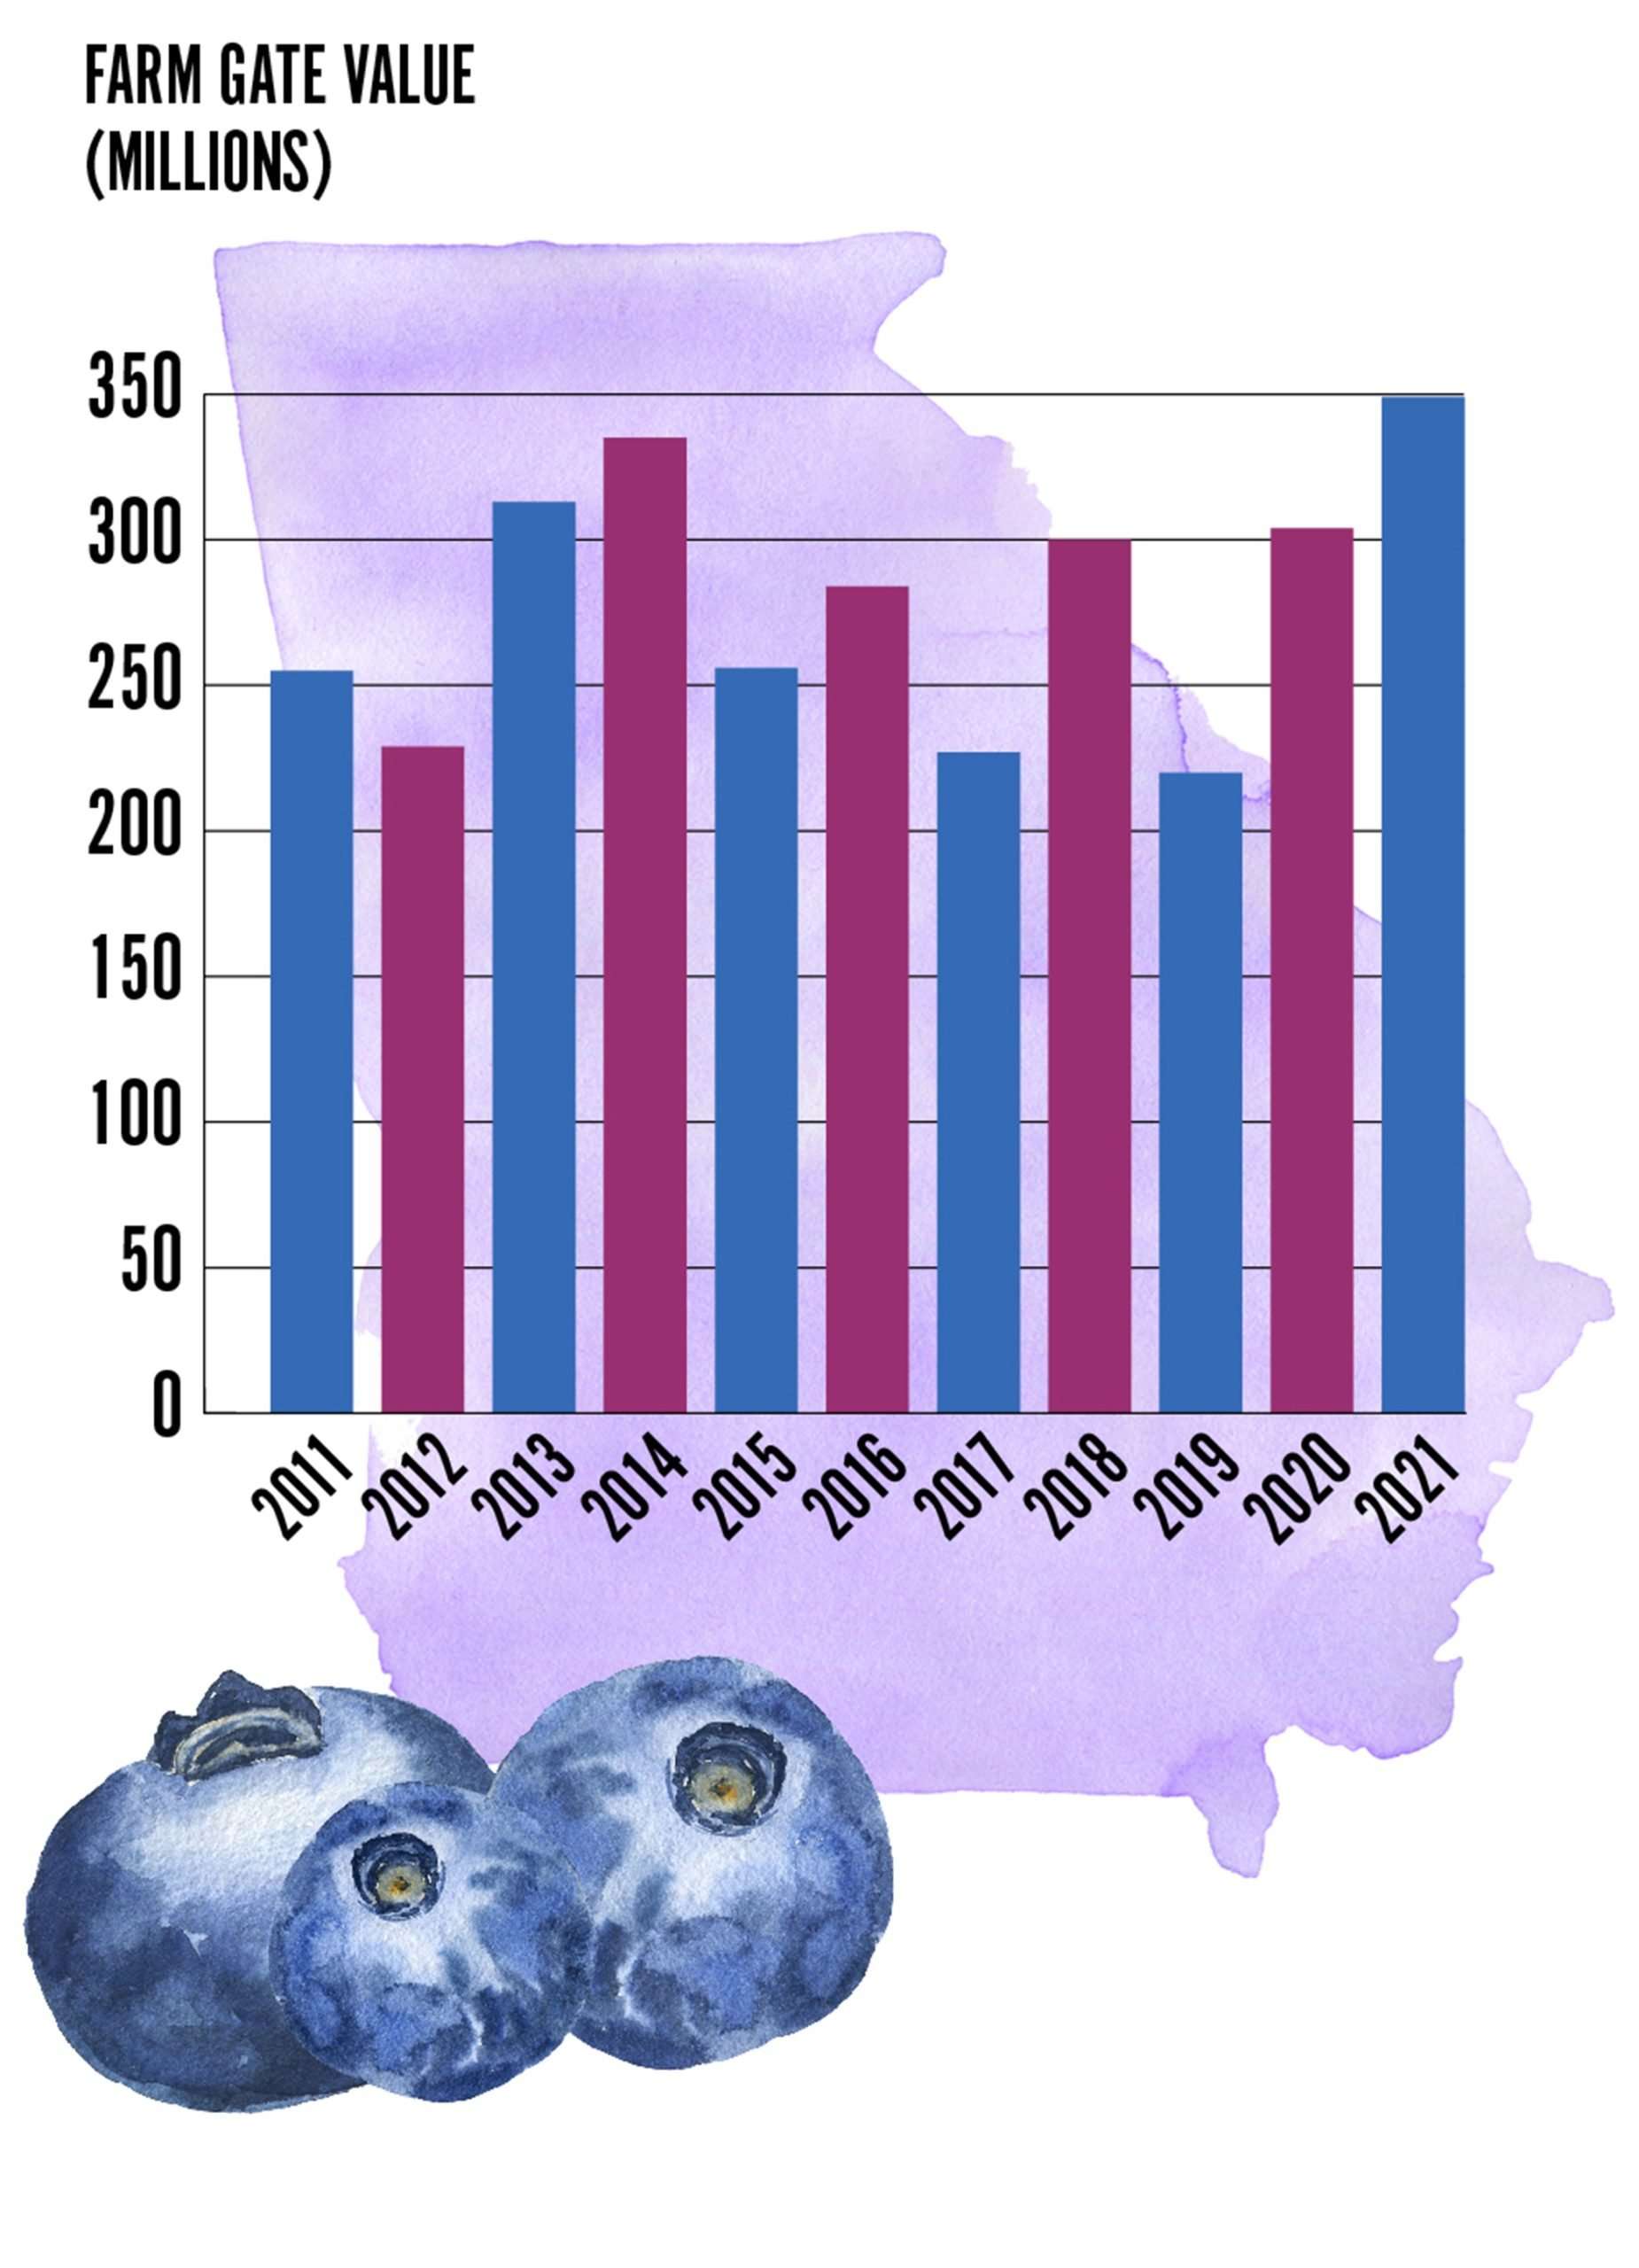 Farm gate value graph of blueberries in Georgia, from 2011-2021